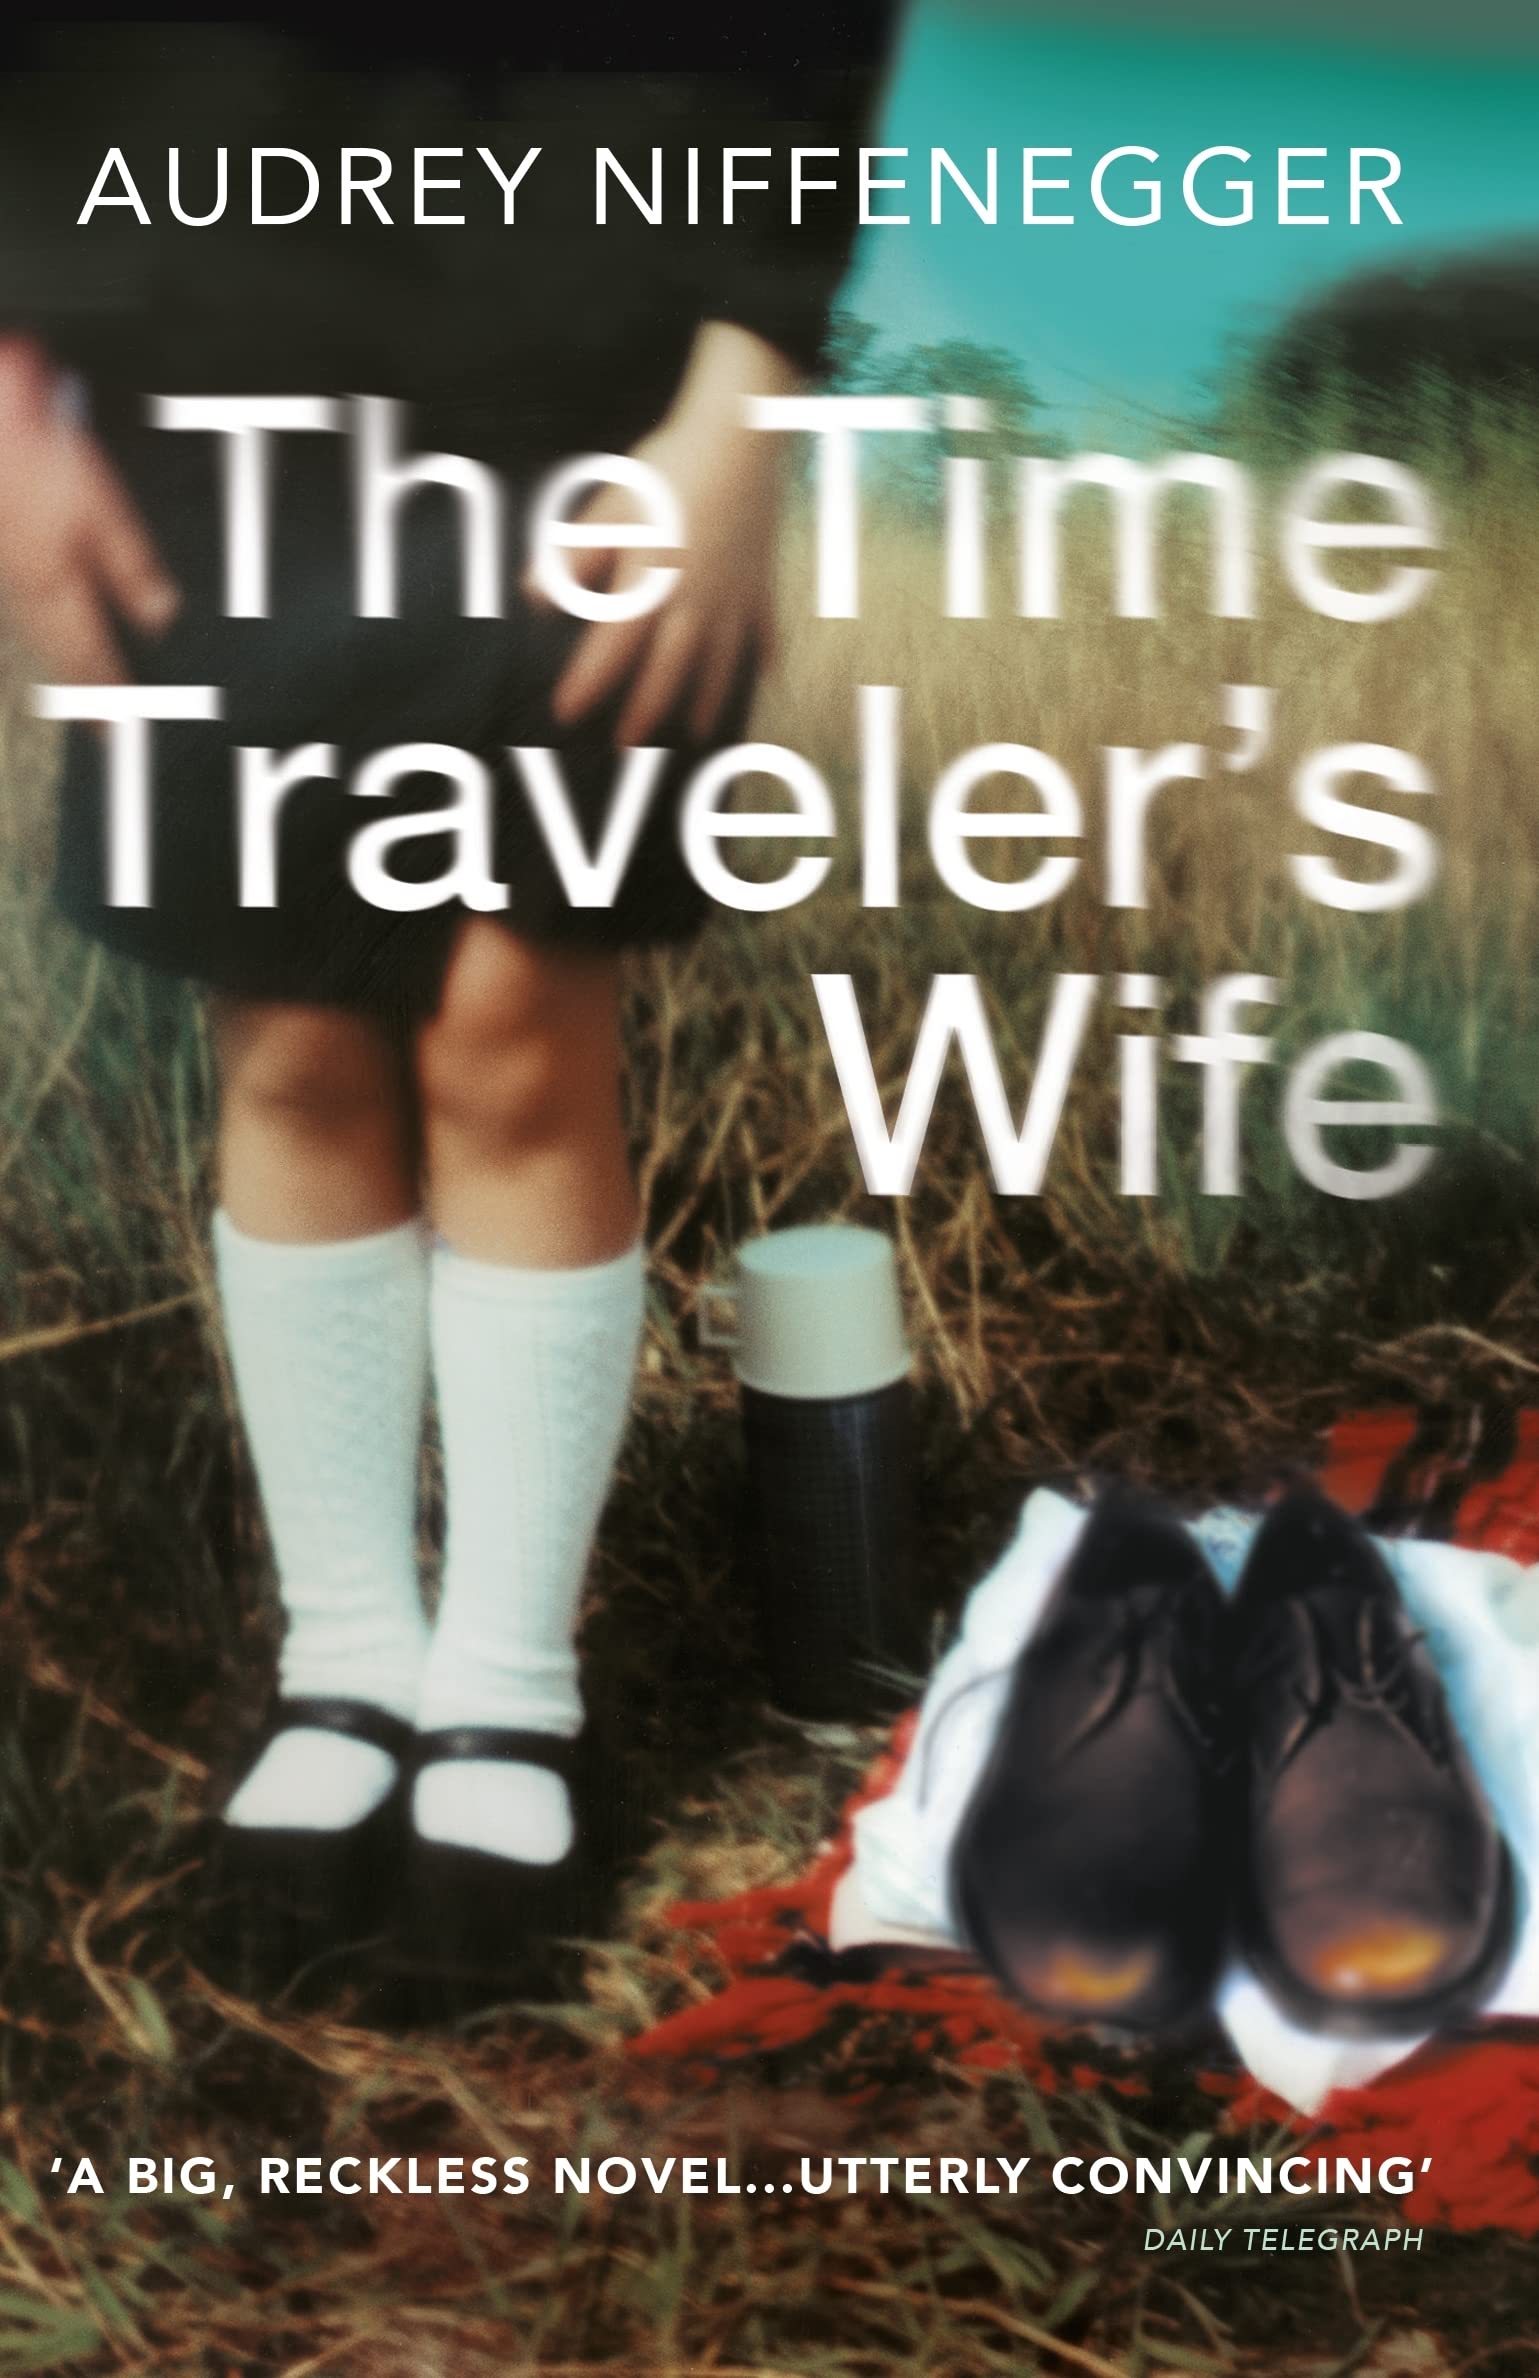 Audrey Niffenegger, Laurel Lefkow, William Hope, Audrey Niffenegger: The Time Traveler's Wife (2013)